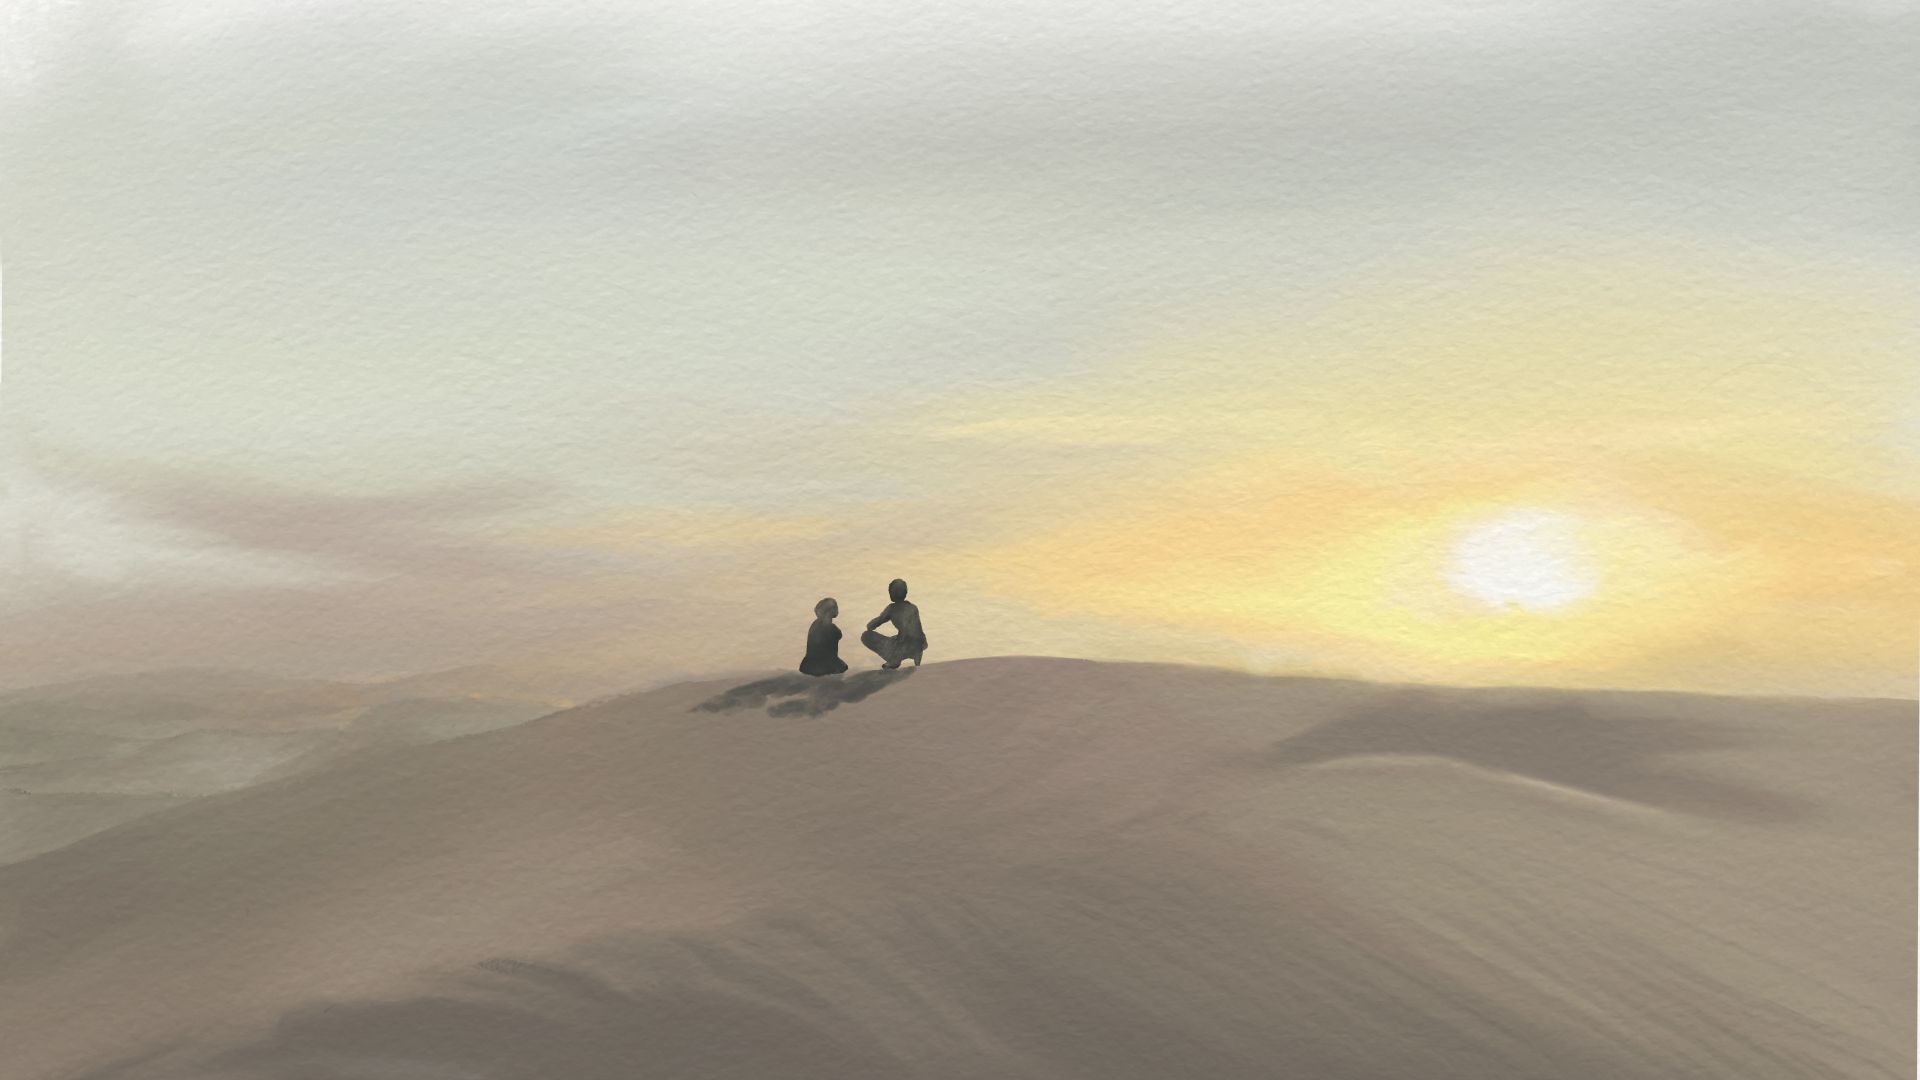 An illustration of a sand dune with two people sitting on it with the sun setting.